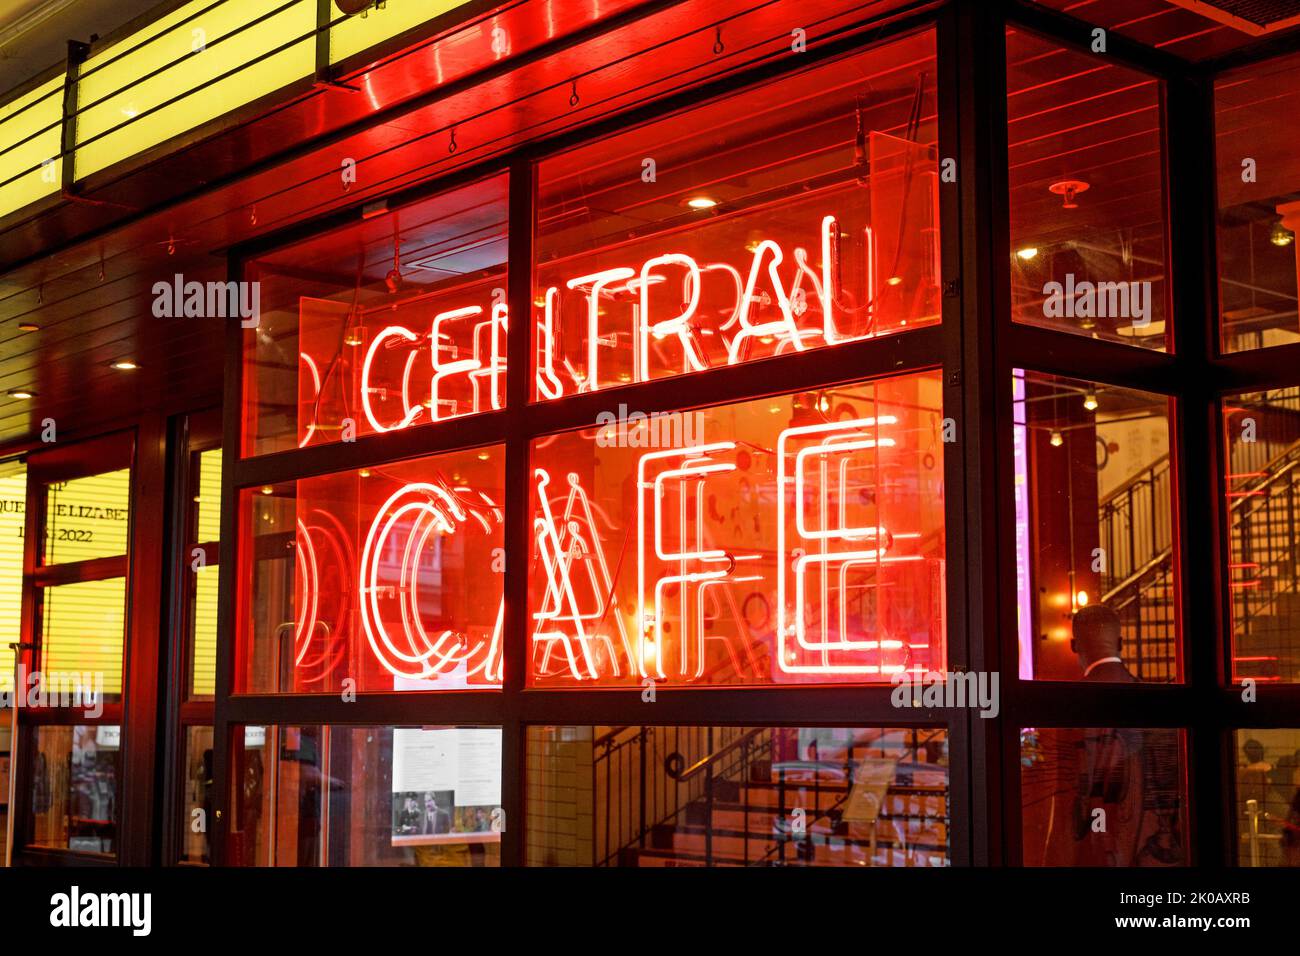 Red Central Cafe neon sign in the window of a Picture house Cinema. London Stock Photo